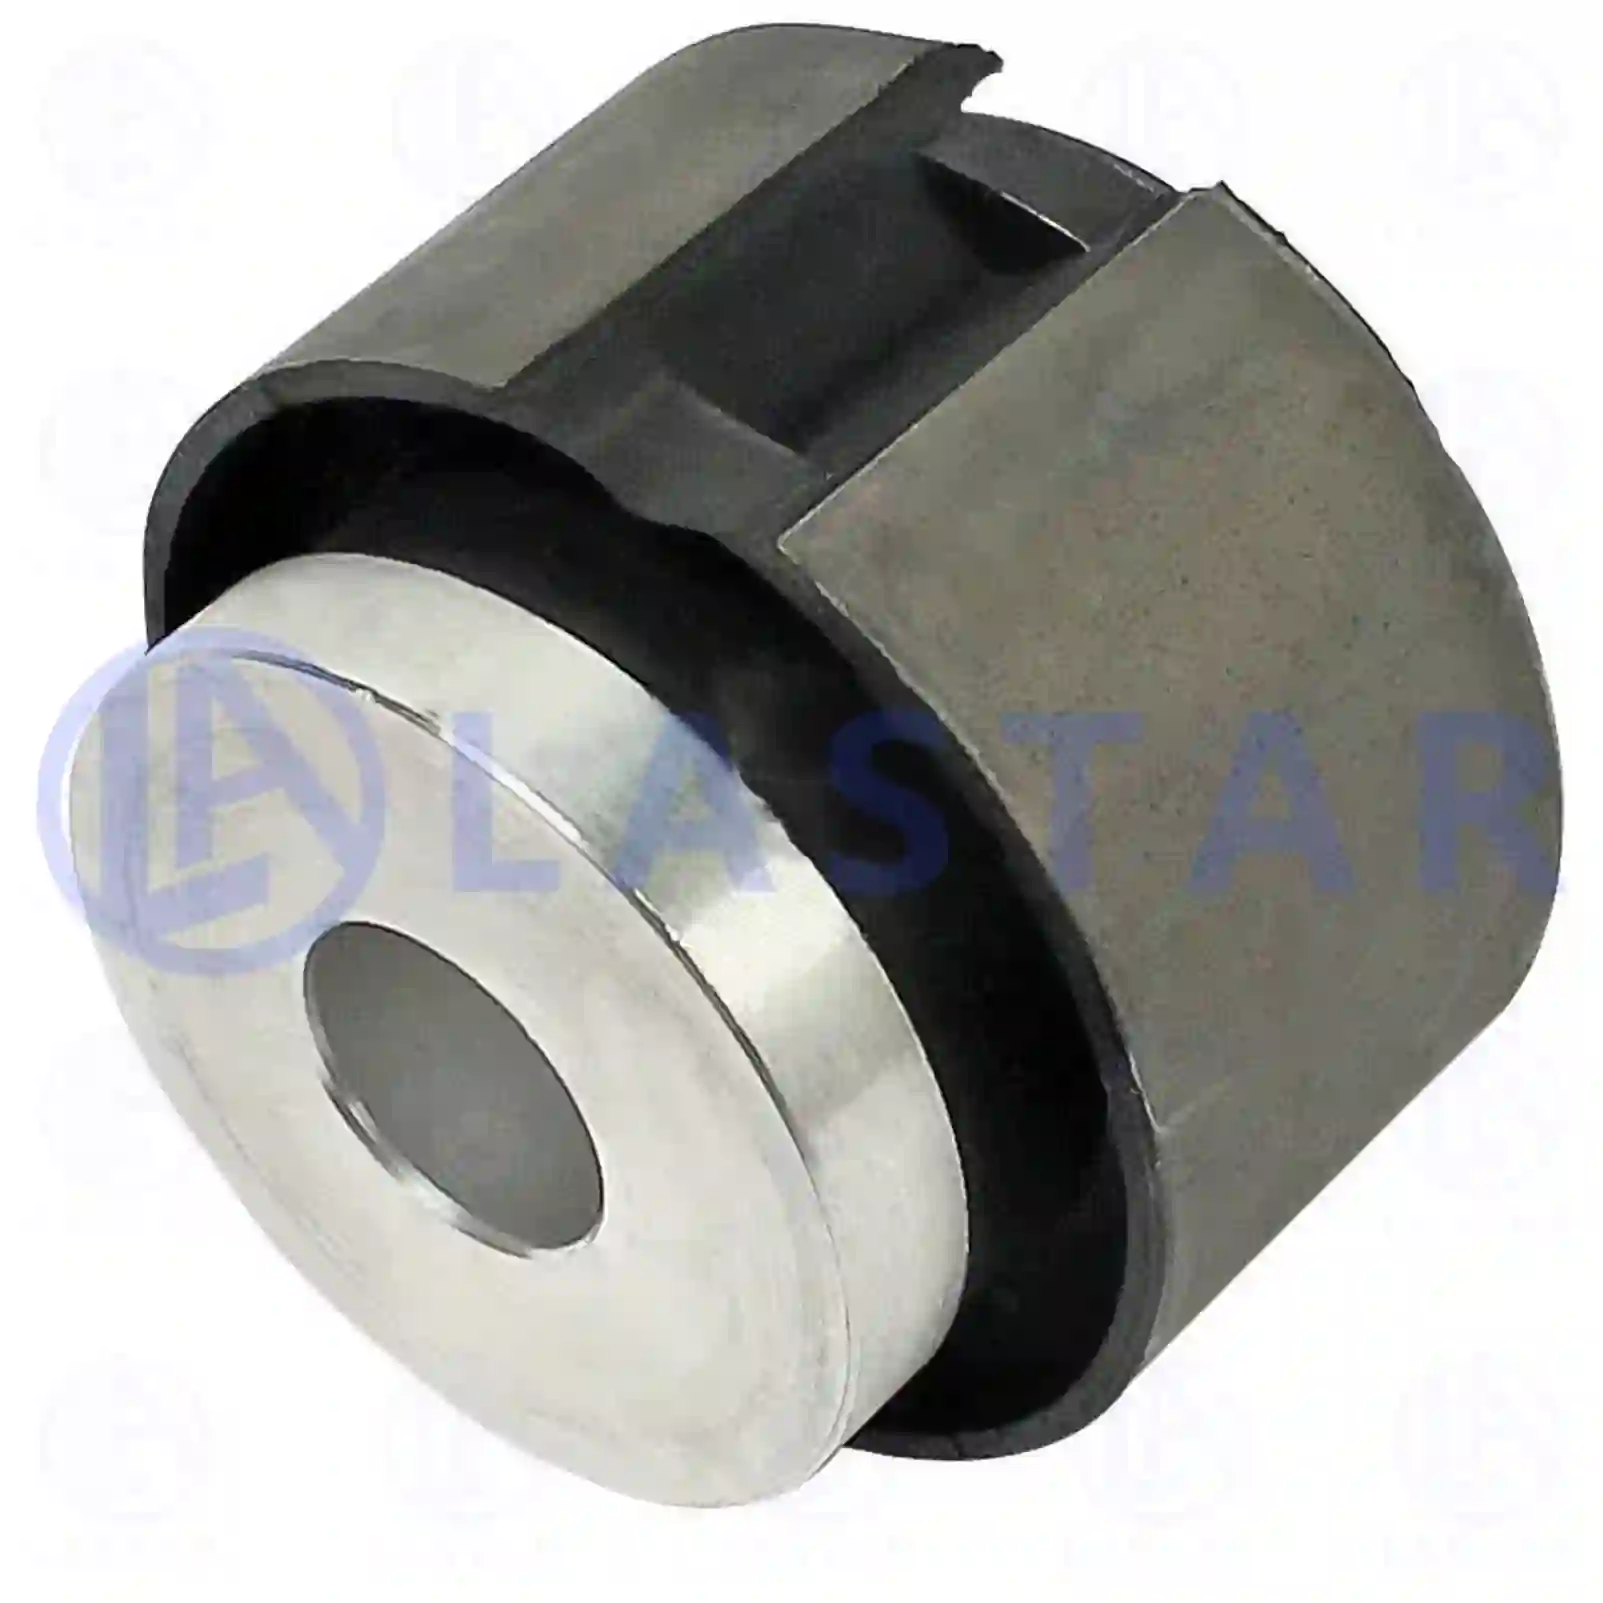 Bushing, coupling rod, 77728307, 9603231985, 9603233185, , ||  77728307 Lastar Spare Part | Truck Spare Parts, Auotomotive Spare Parts Bushing, coupling rod, 77728307, 9603231985, 9603233185, , ||  77728307 Lastar Spare Part | Truck Spare Parts, Auotomotive Spare Parts